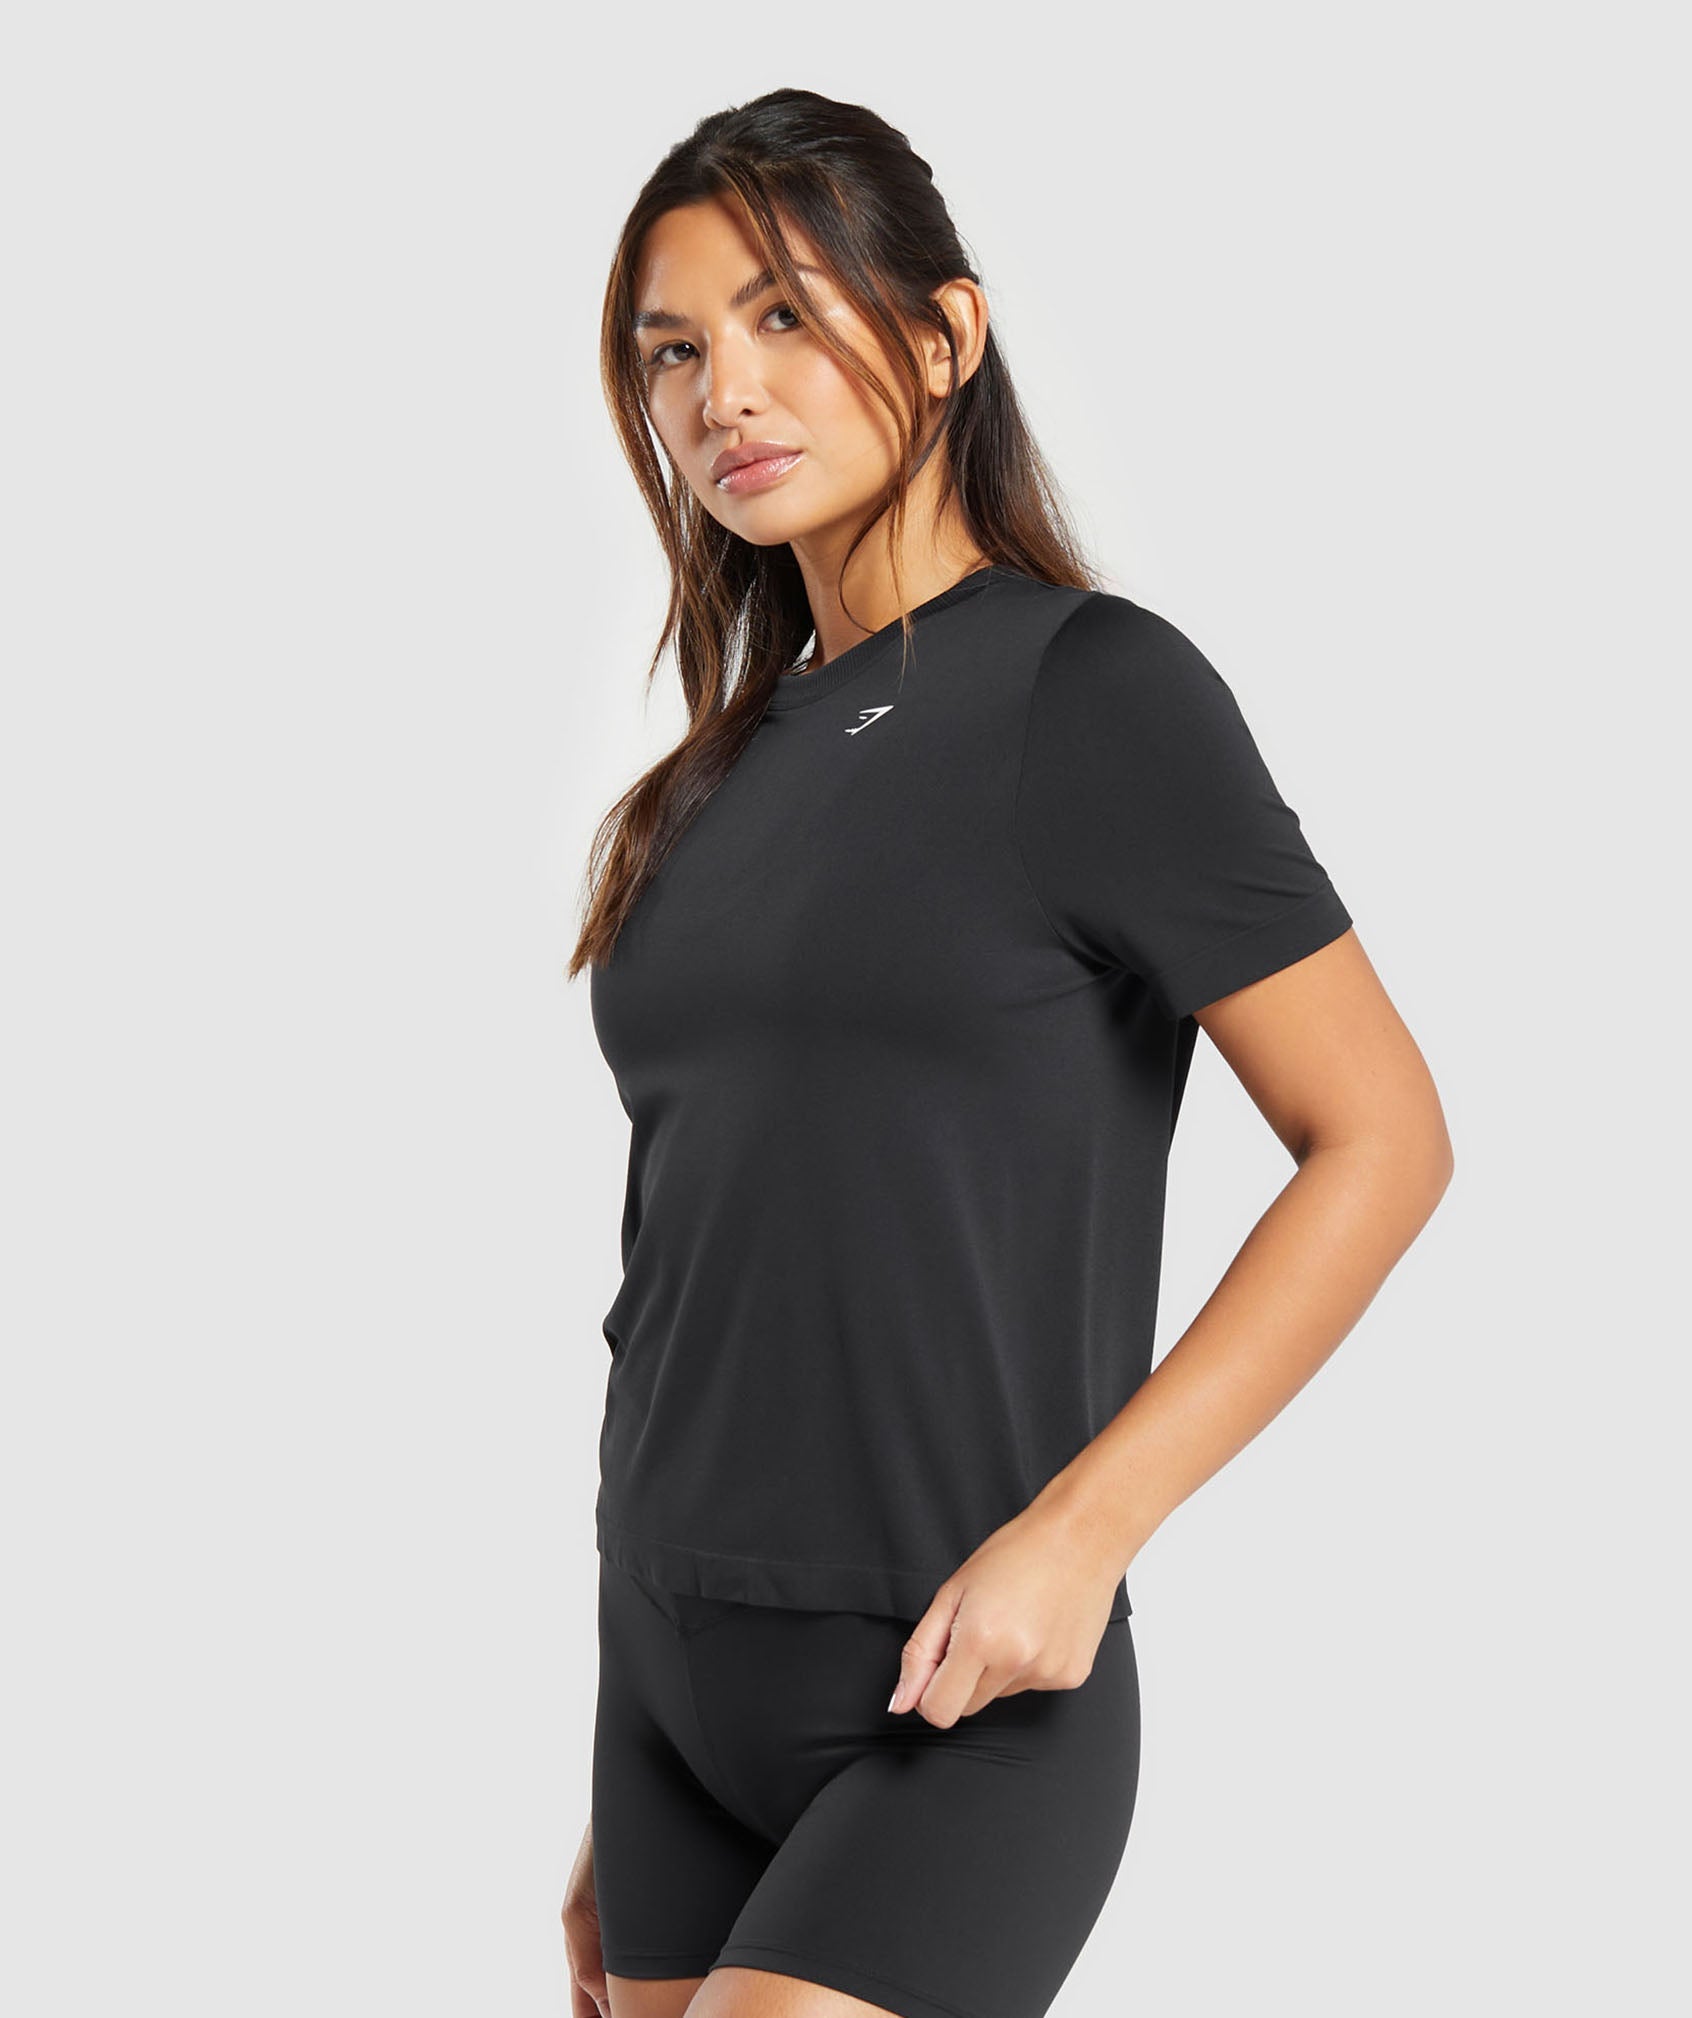 Everyday Seamless T-Shirt in Black - view 6